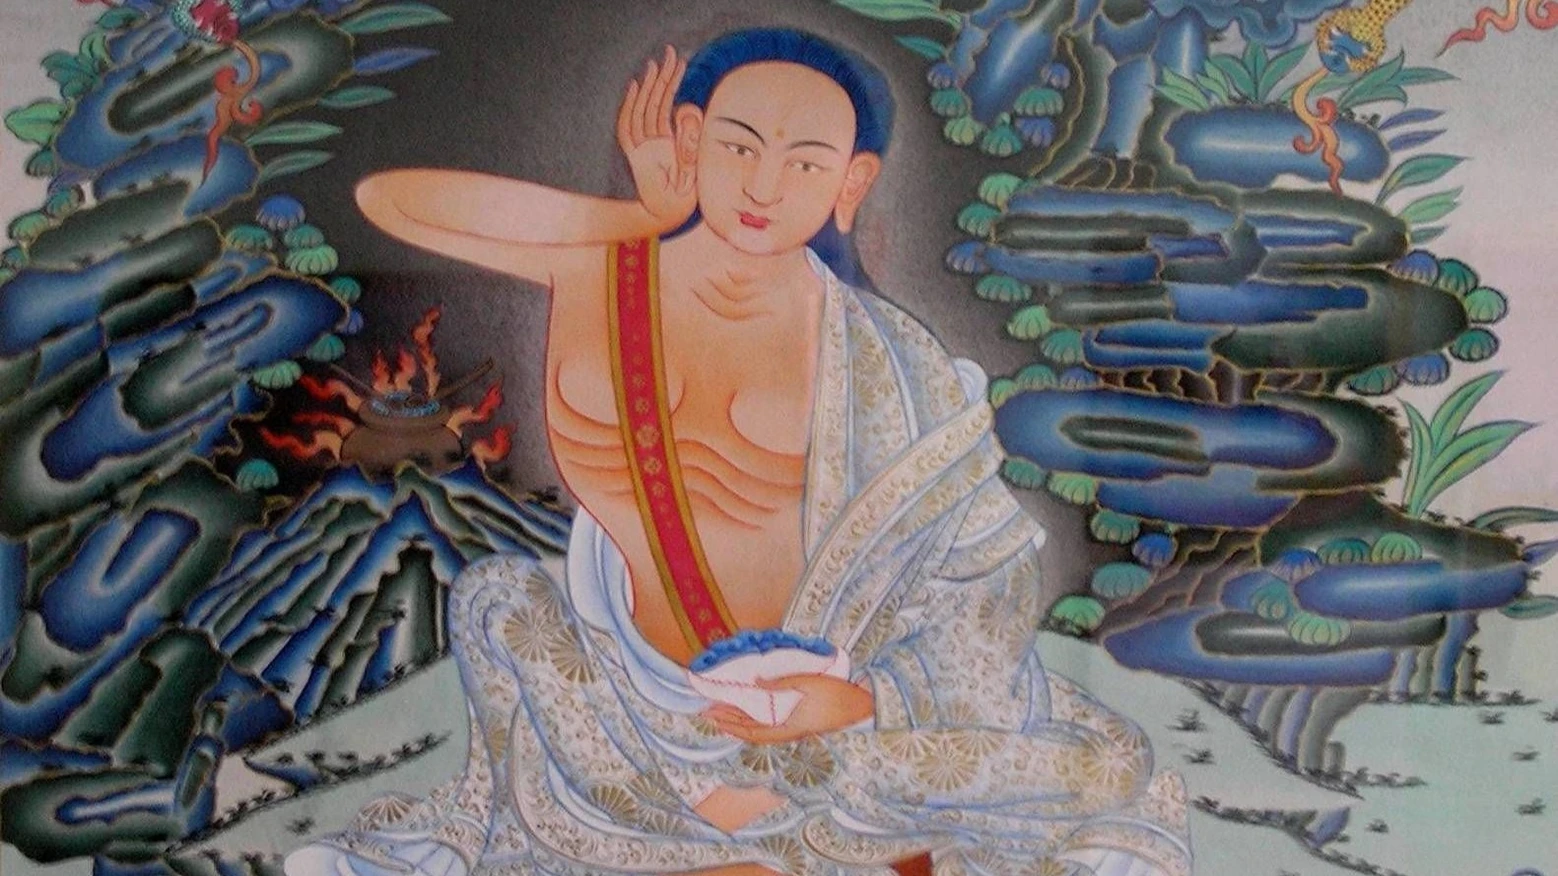 Milarepa - one of Tibet's most famous yogis